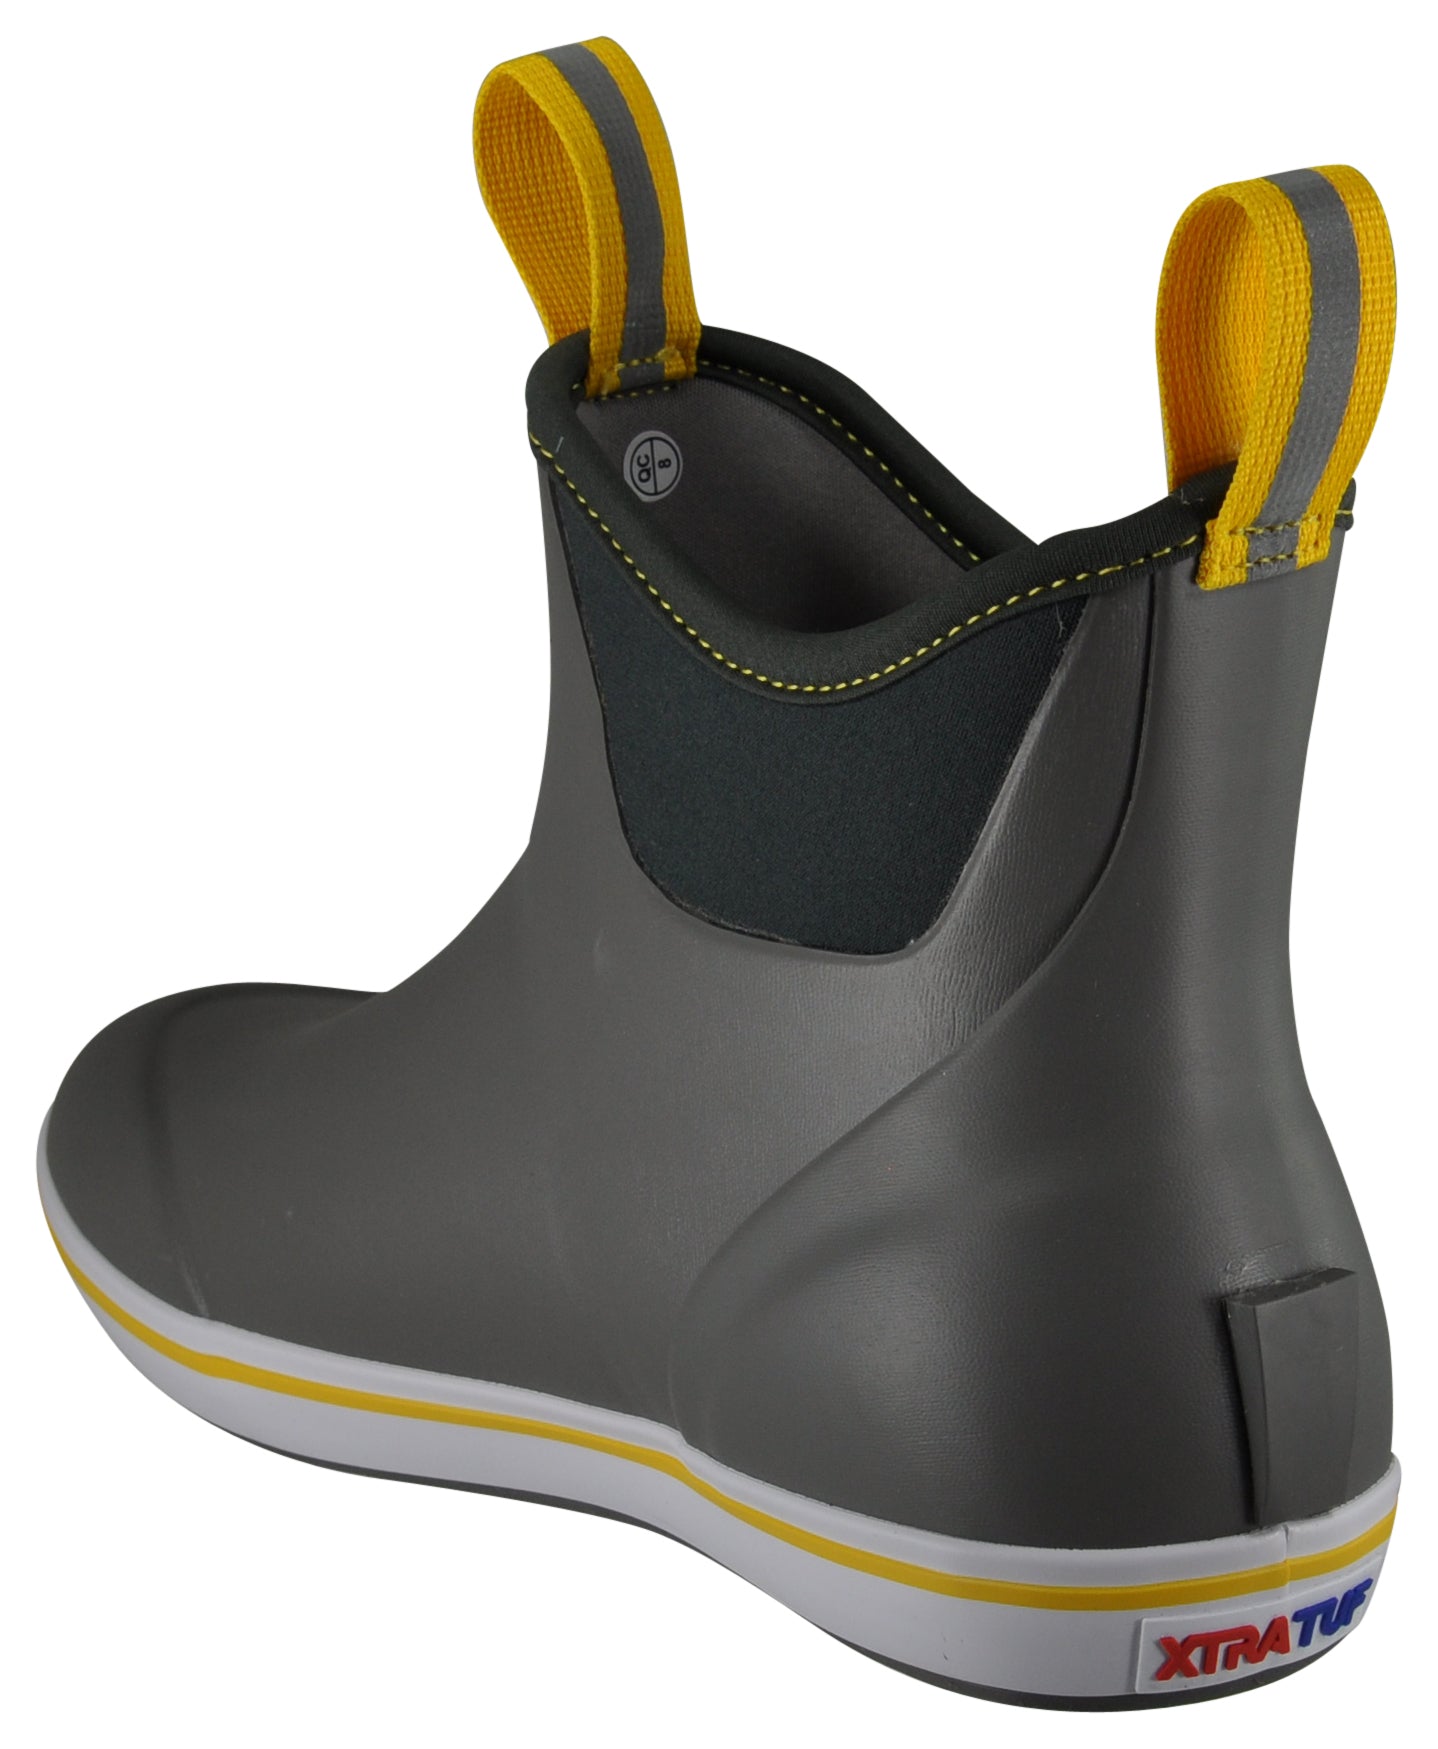 MEN'S ANKLE DECK BOOT GRAY/YELLOW